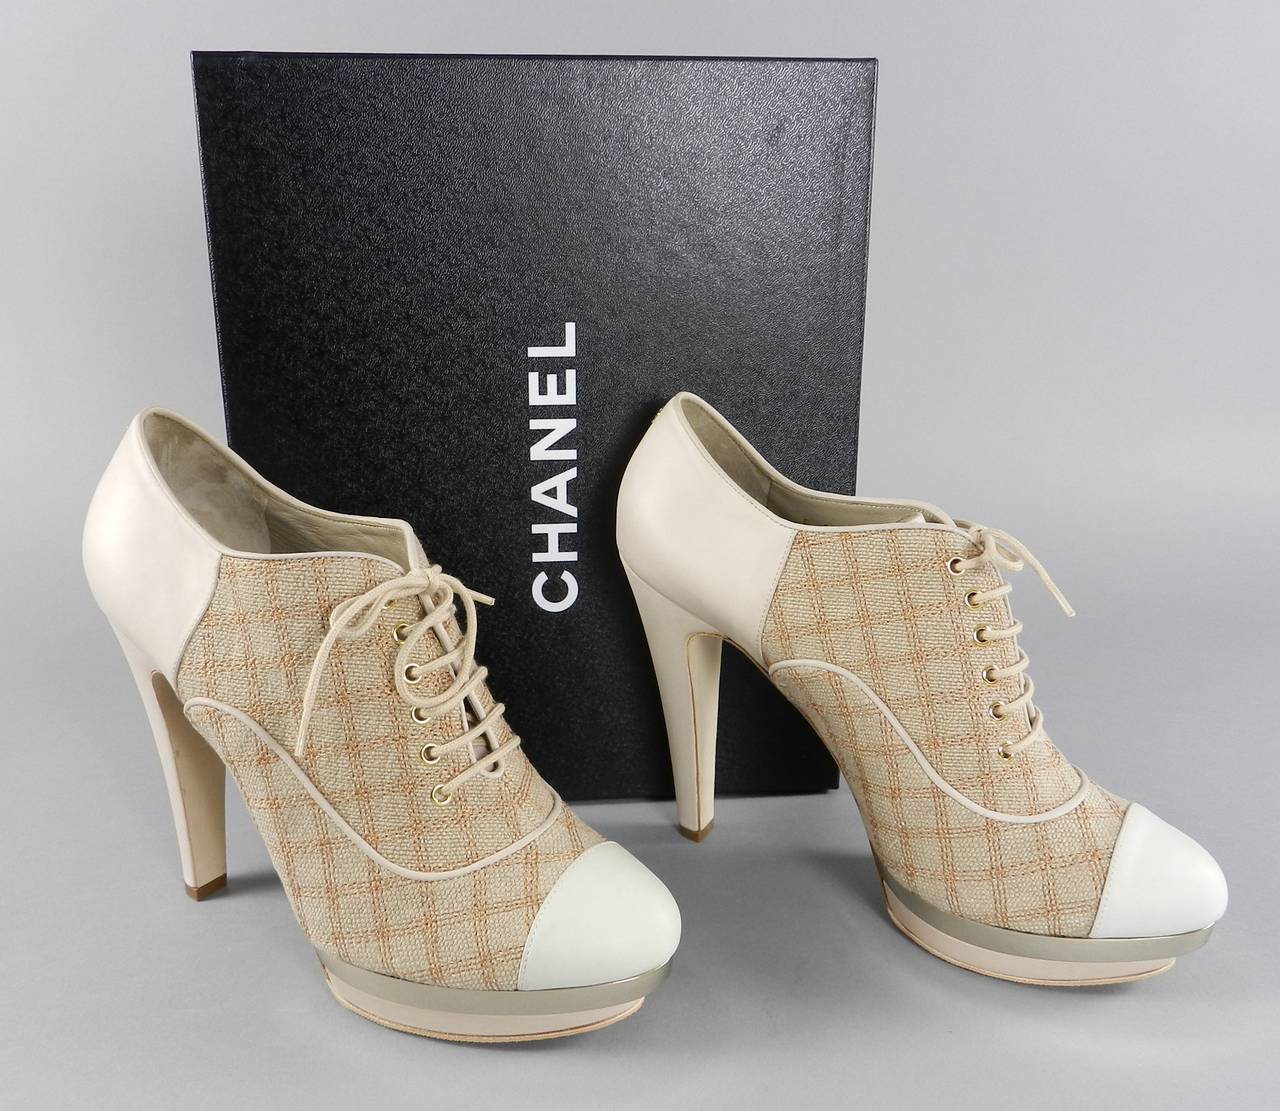 Chanel 2014 spring beige leather linen lace-up booties with gold metallic platform. Never worn. New in box. Anti-slip grips have been professionally added to bottom front sole. Size 41. Interior toe to heel measures 10.5